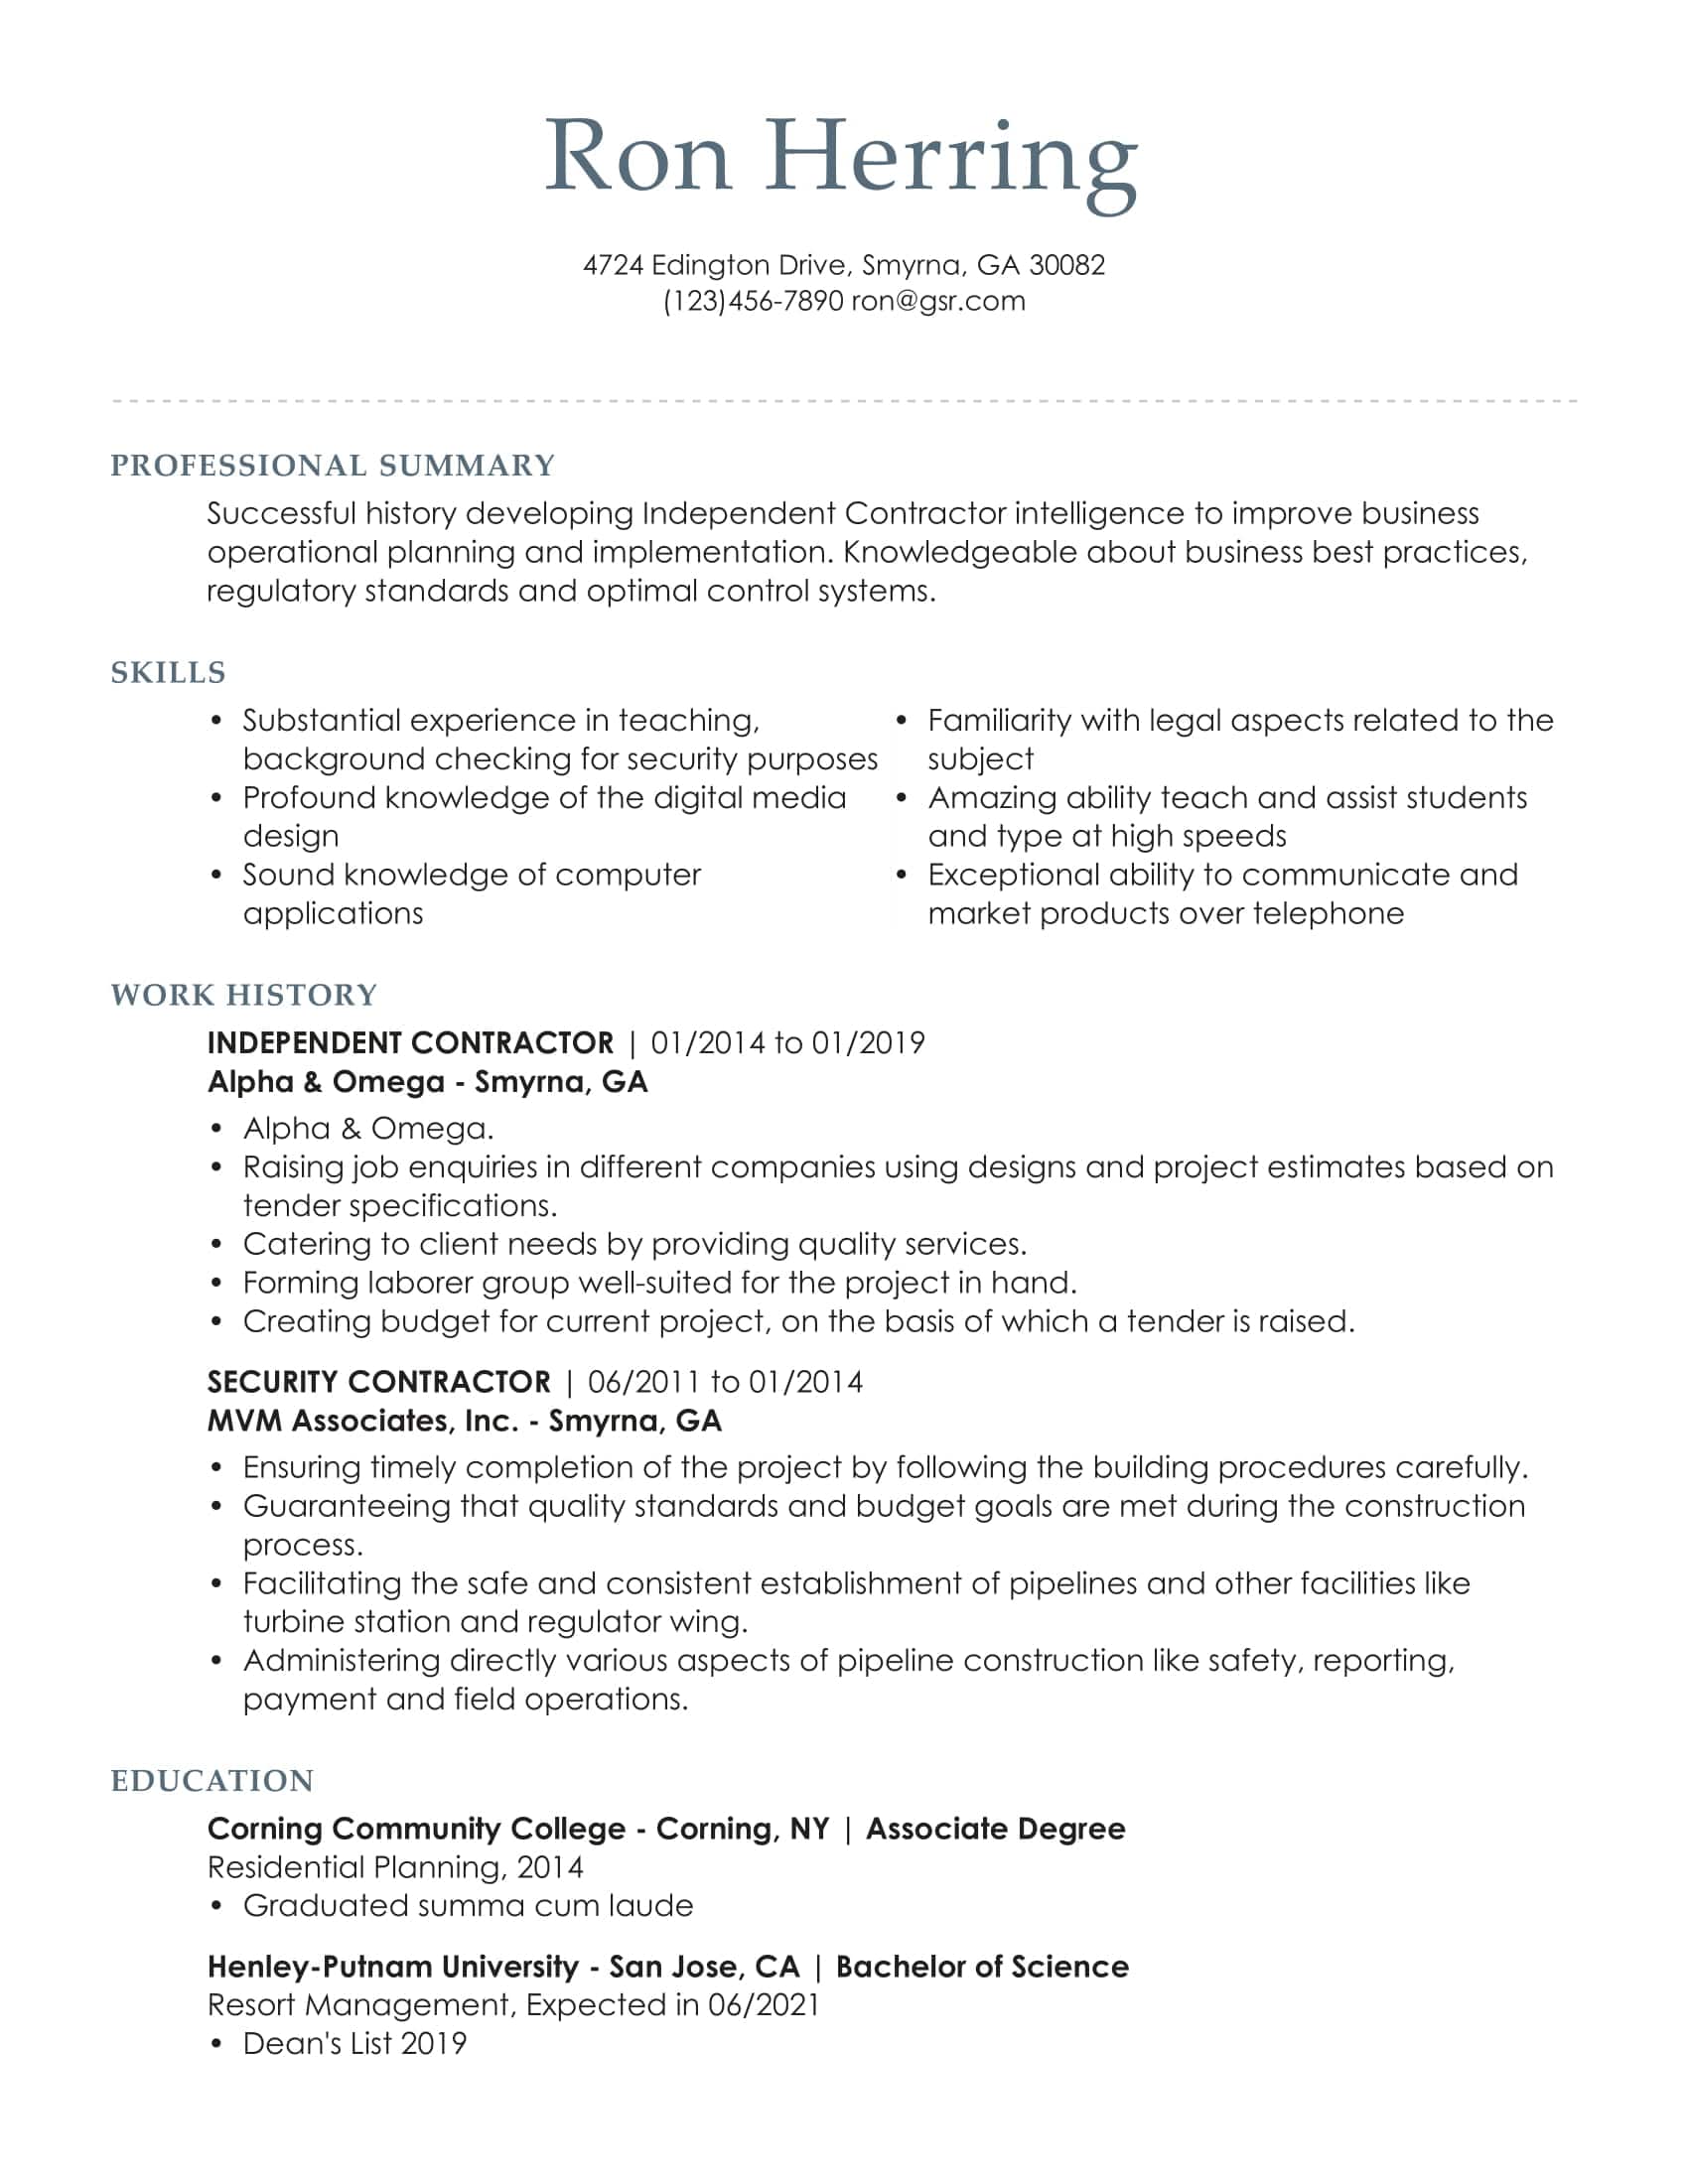 2020 resume format template